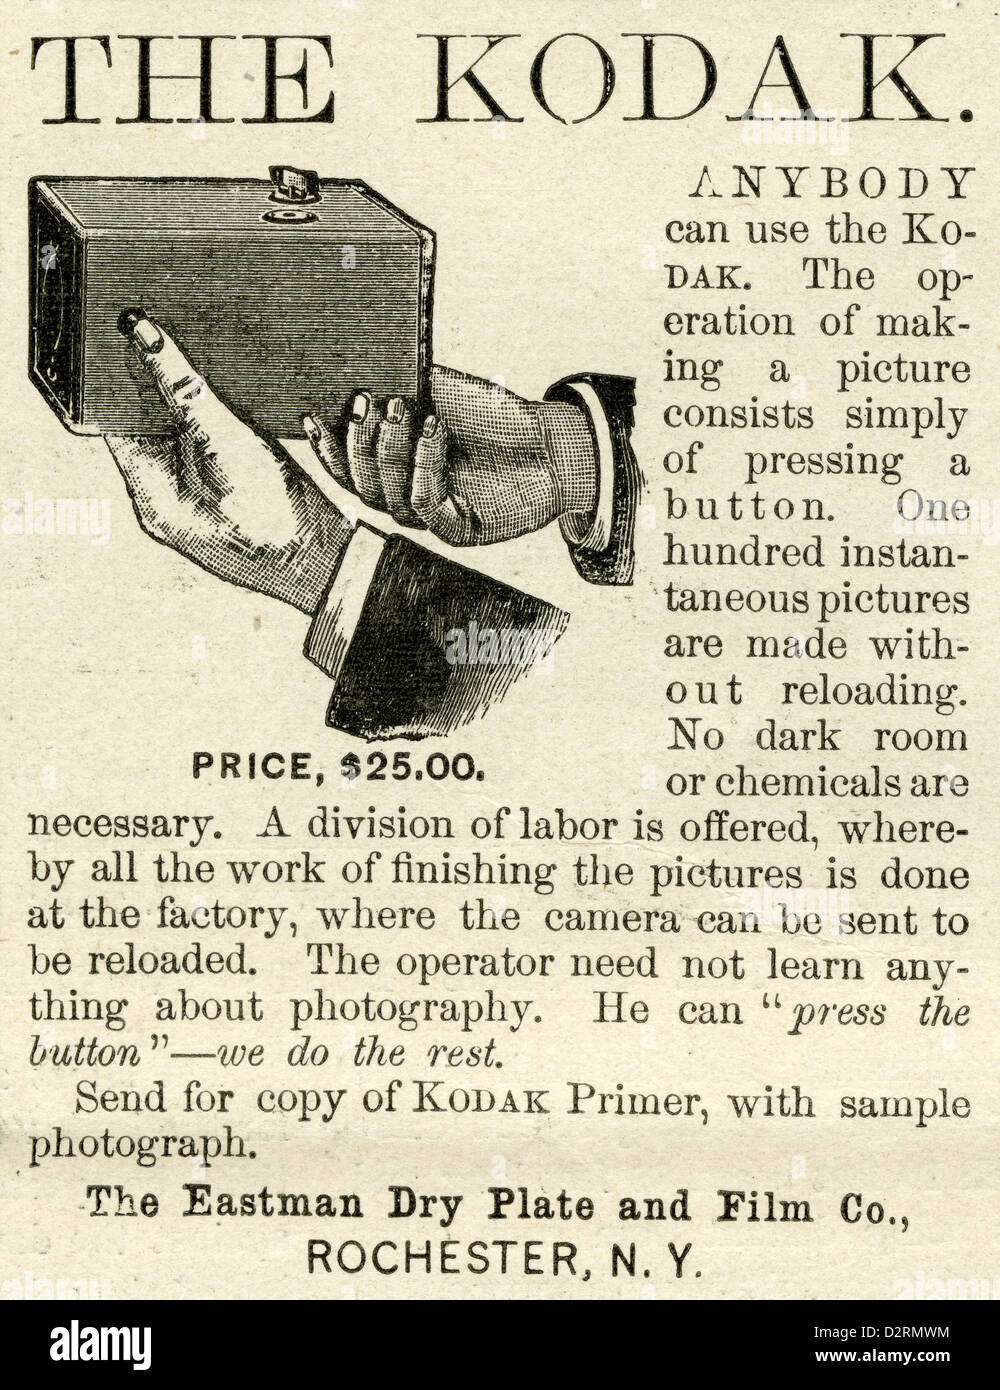 1890 advertisement, The Kodak camera from The Eastman Dry Plate and Film Co. The $25 price in 1890 represents about $650 today. Stock Photo